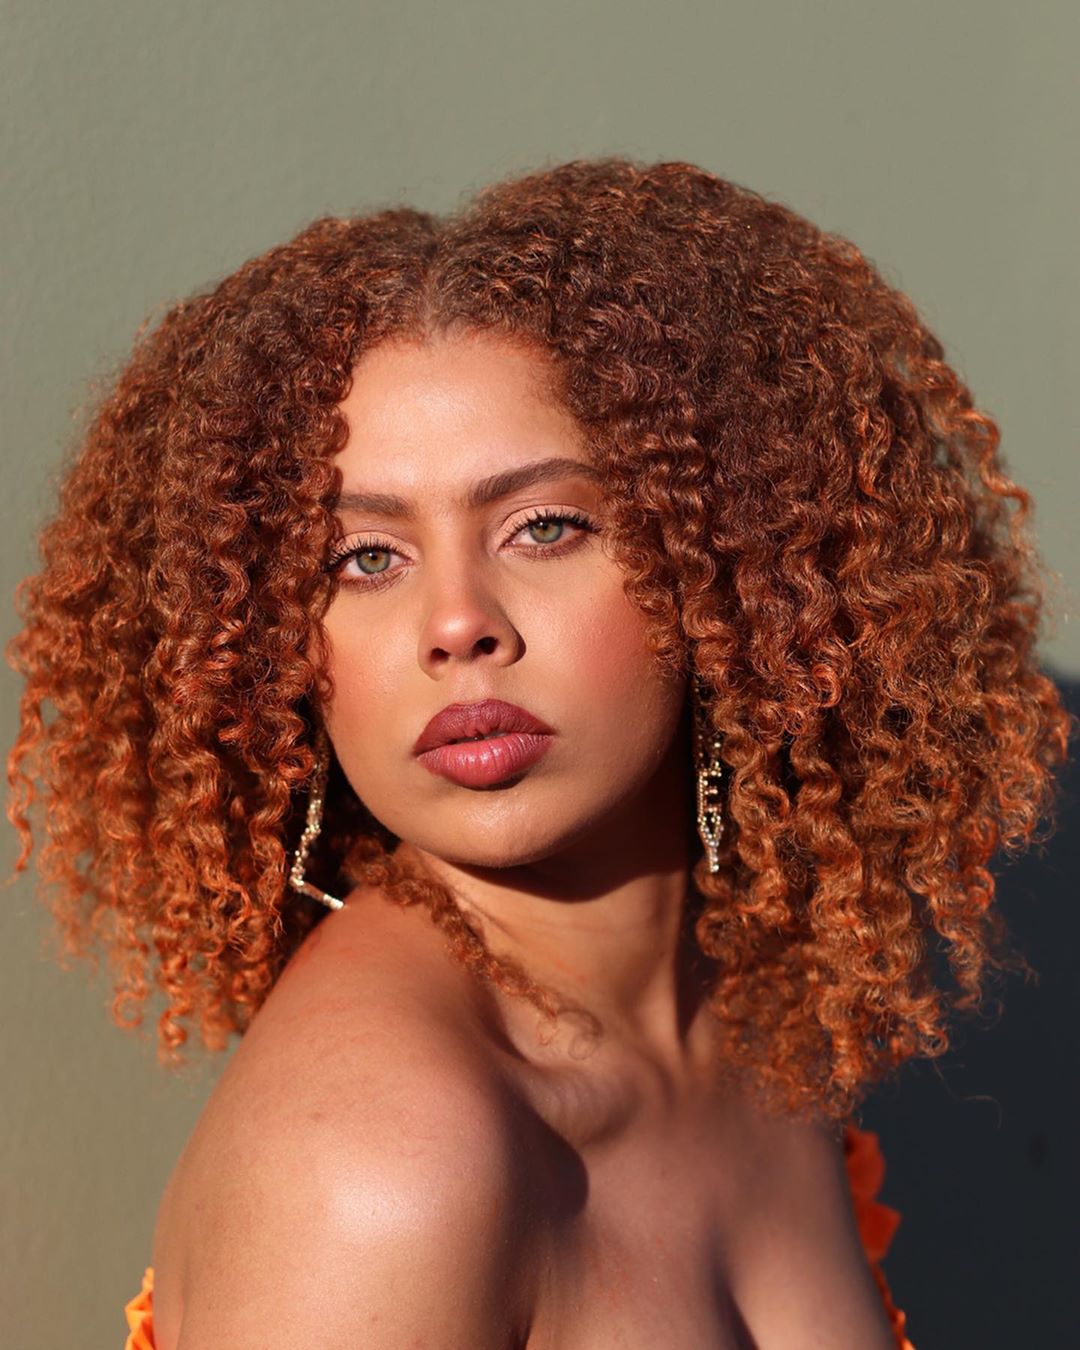 25 Everyday Women Who'll Make You Want To Be A Redhead